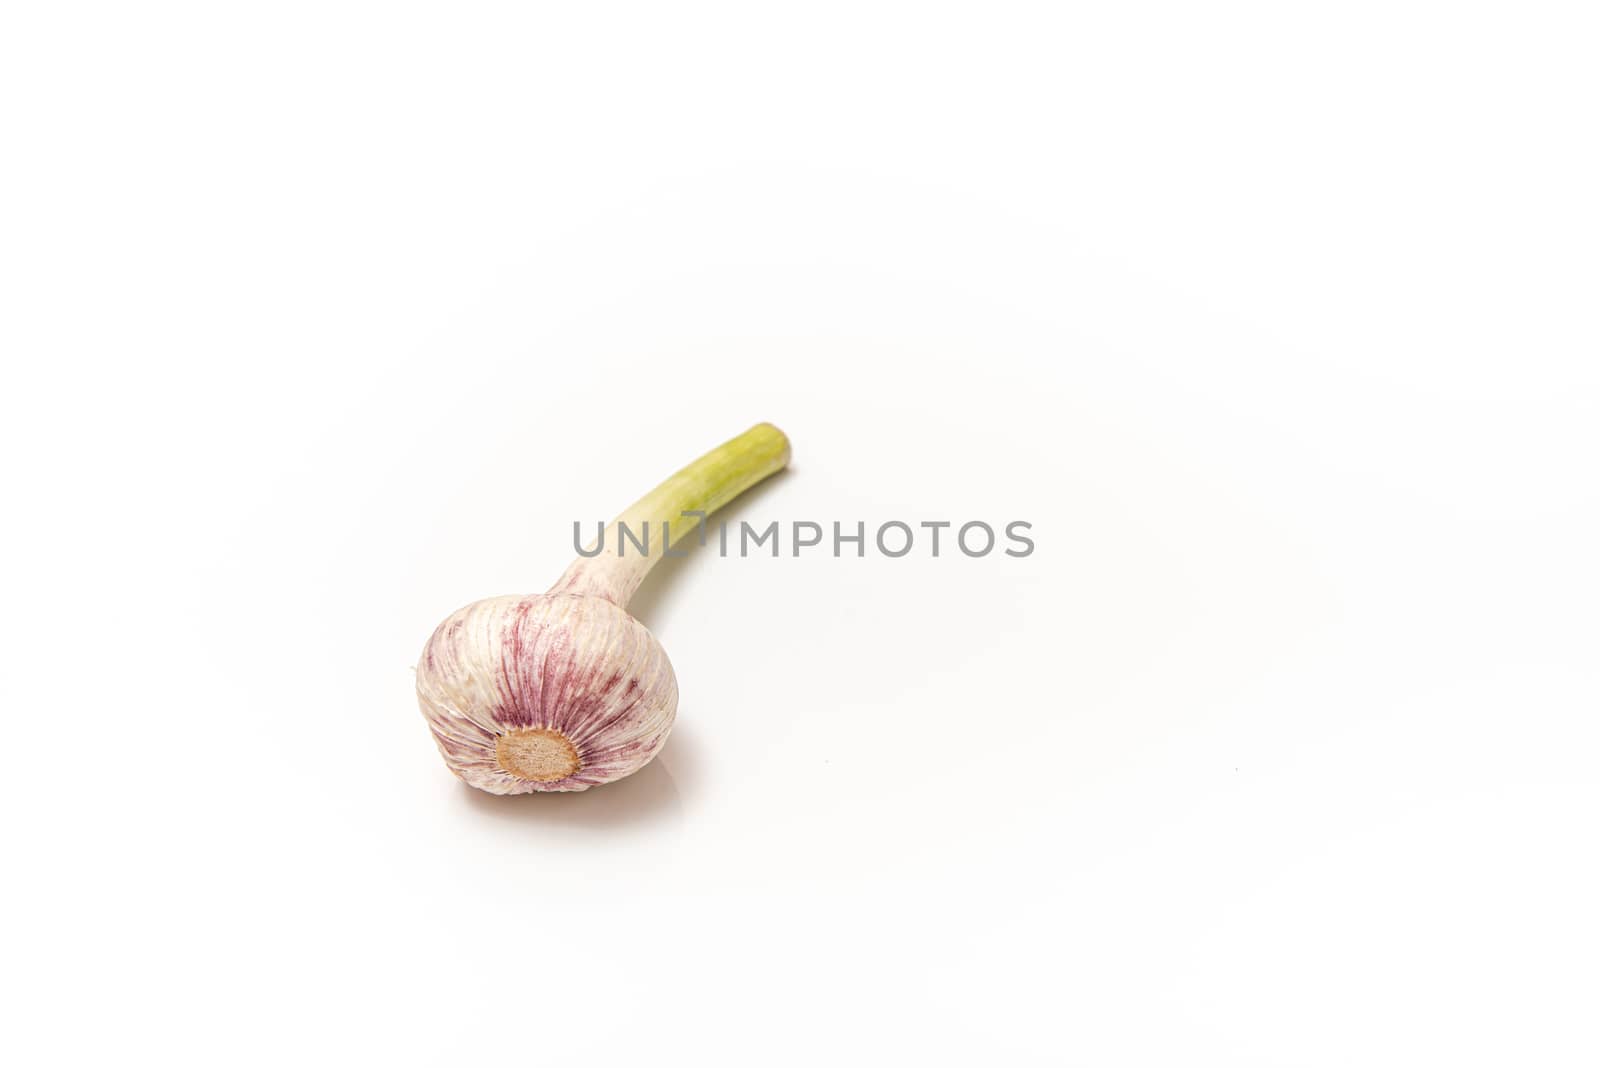 garlic with a stem on a white isolated background with copy space by marynkin